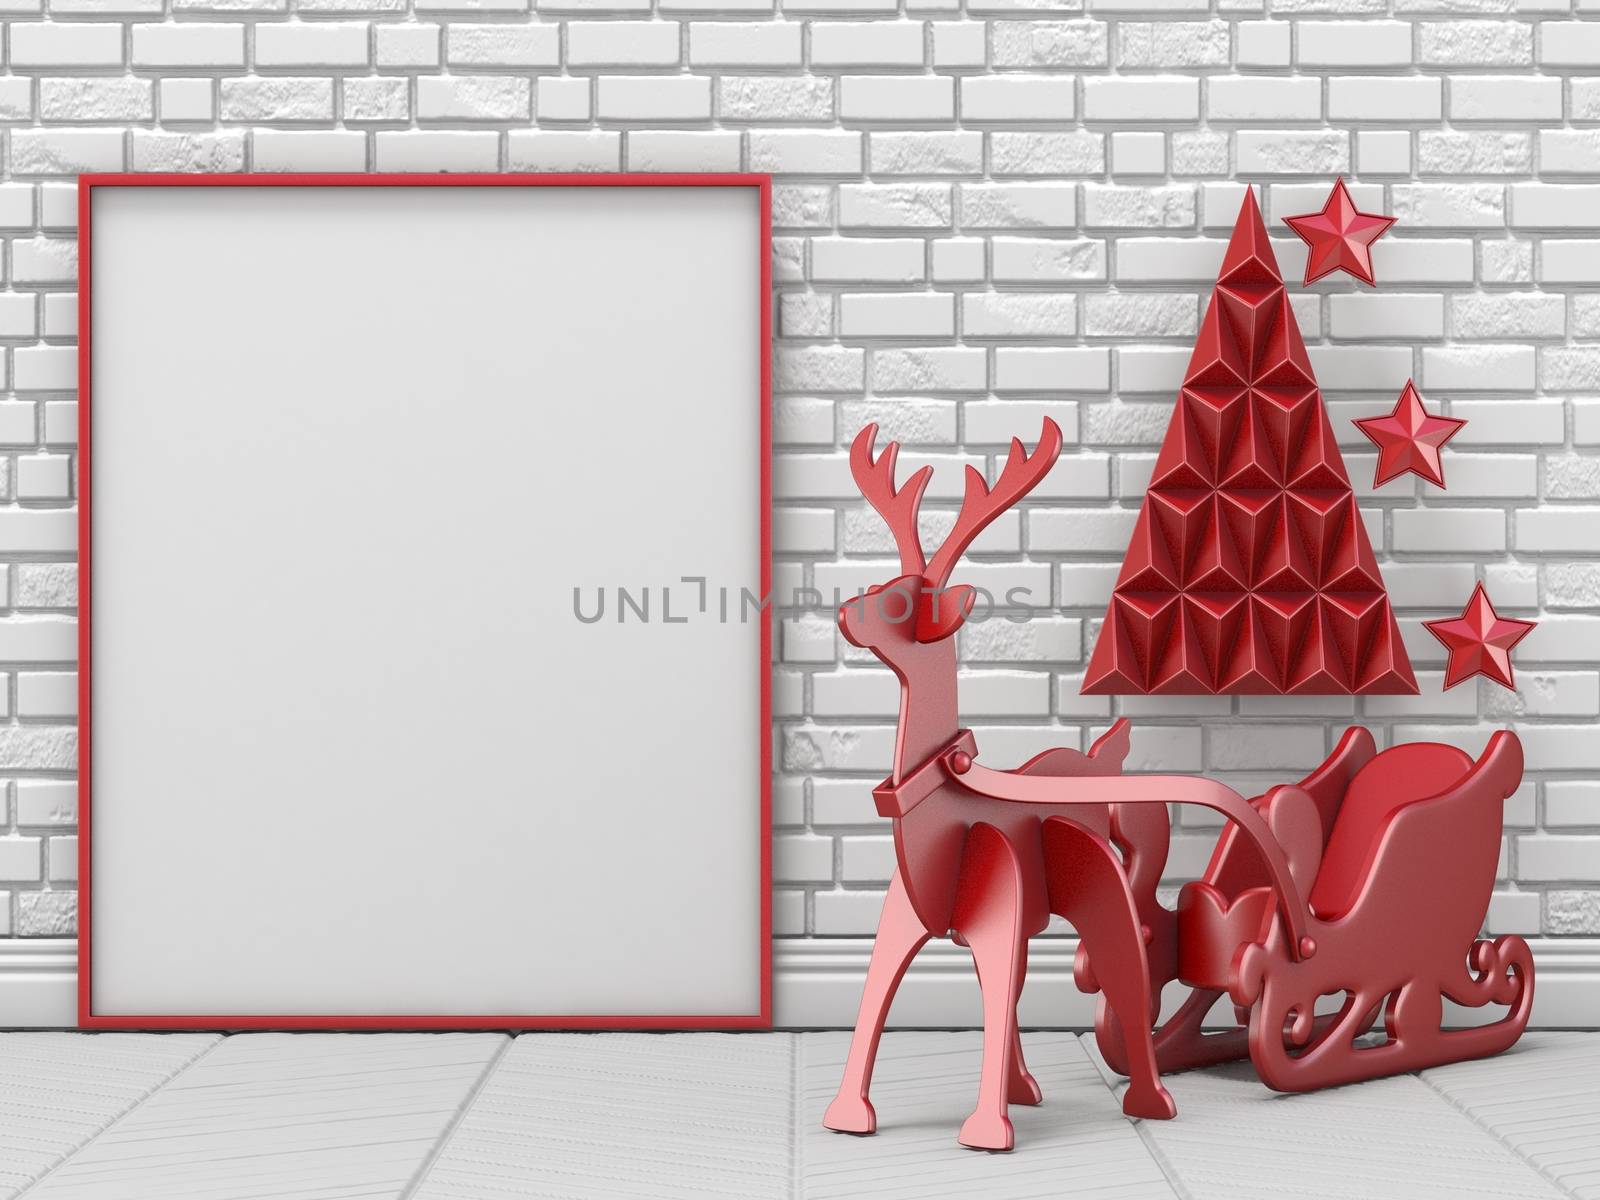 Mock up blank picture frame, Christmas decoration and reindeer with sleigh 3D render illustration